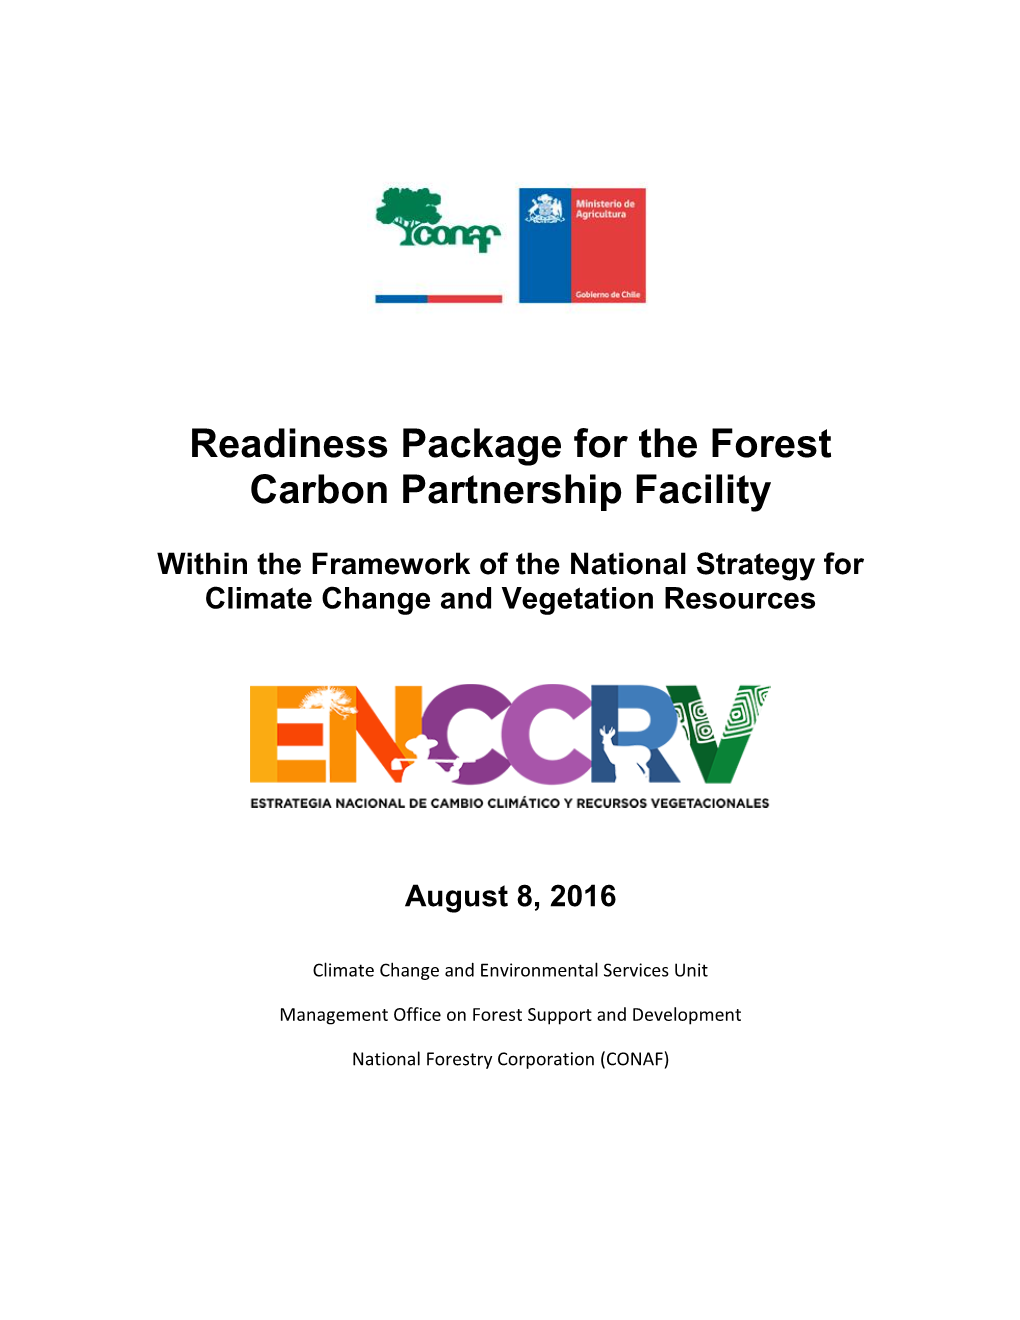 Readiness Package for the Forest Carbon Partnership Facility